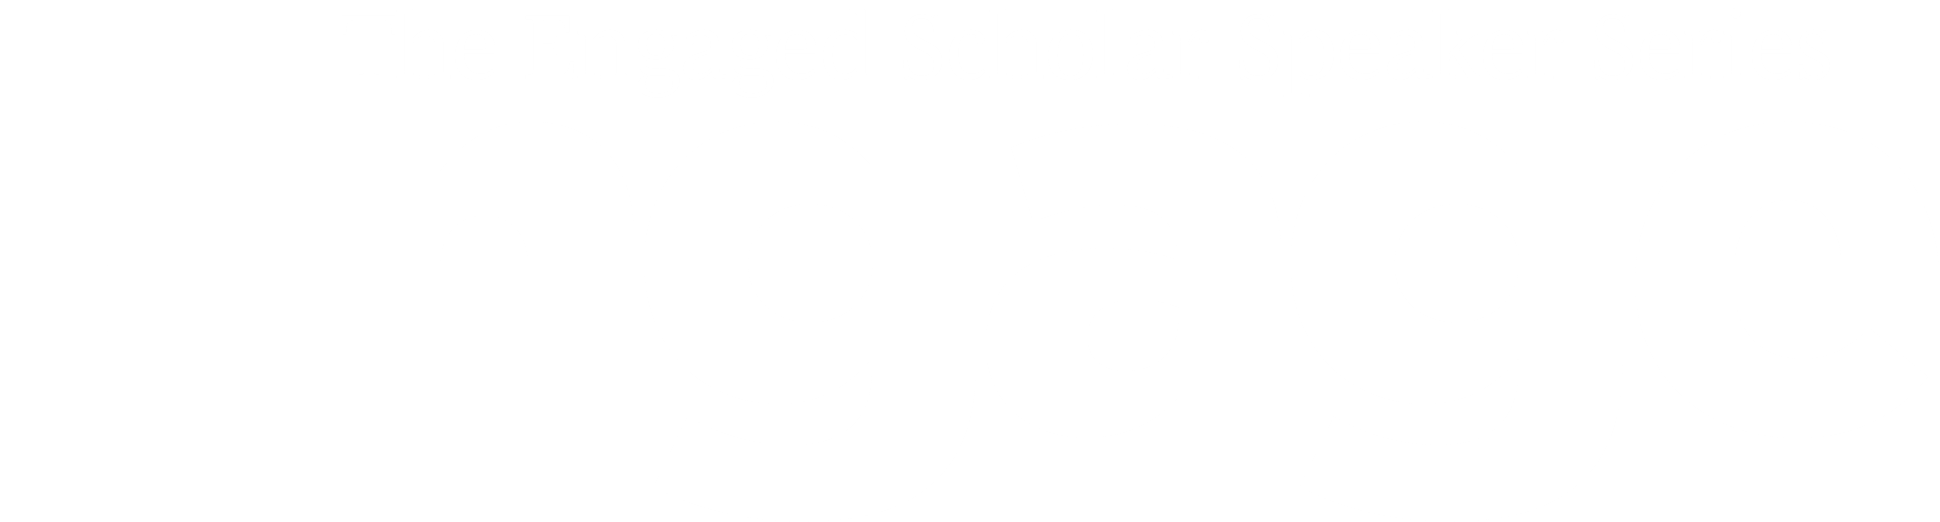 The Engaged Scholar Home Page